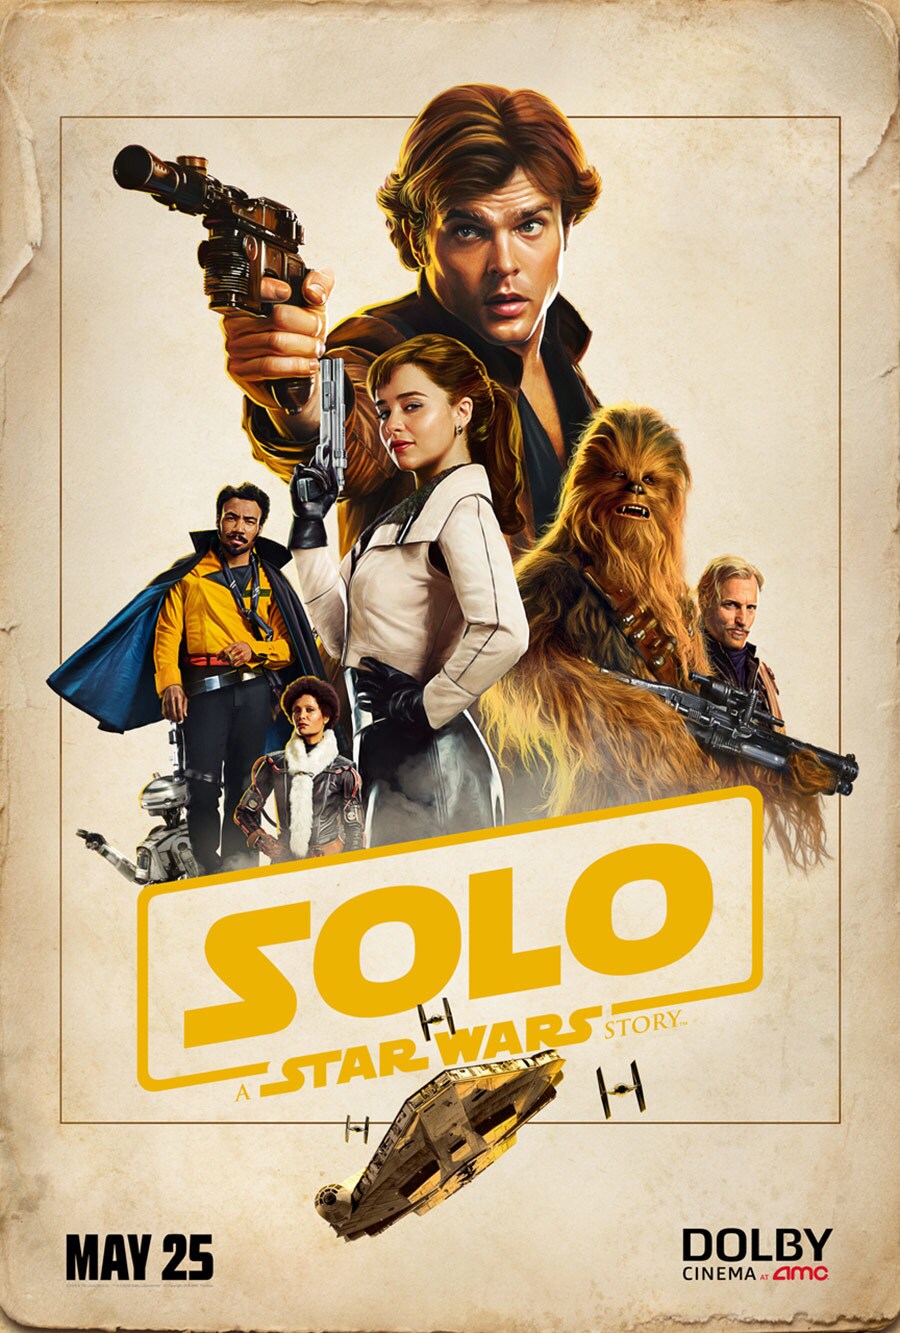 The movie poster for Solo: A Star Wars Story.